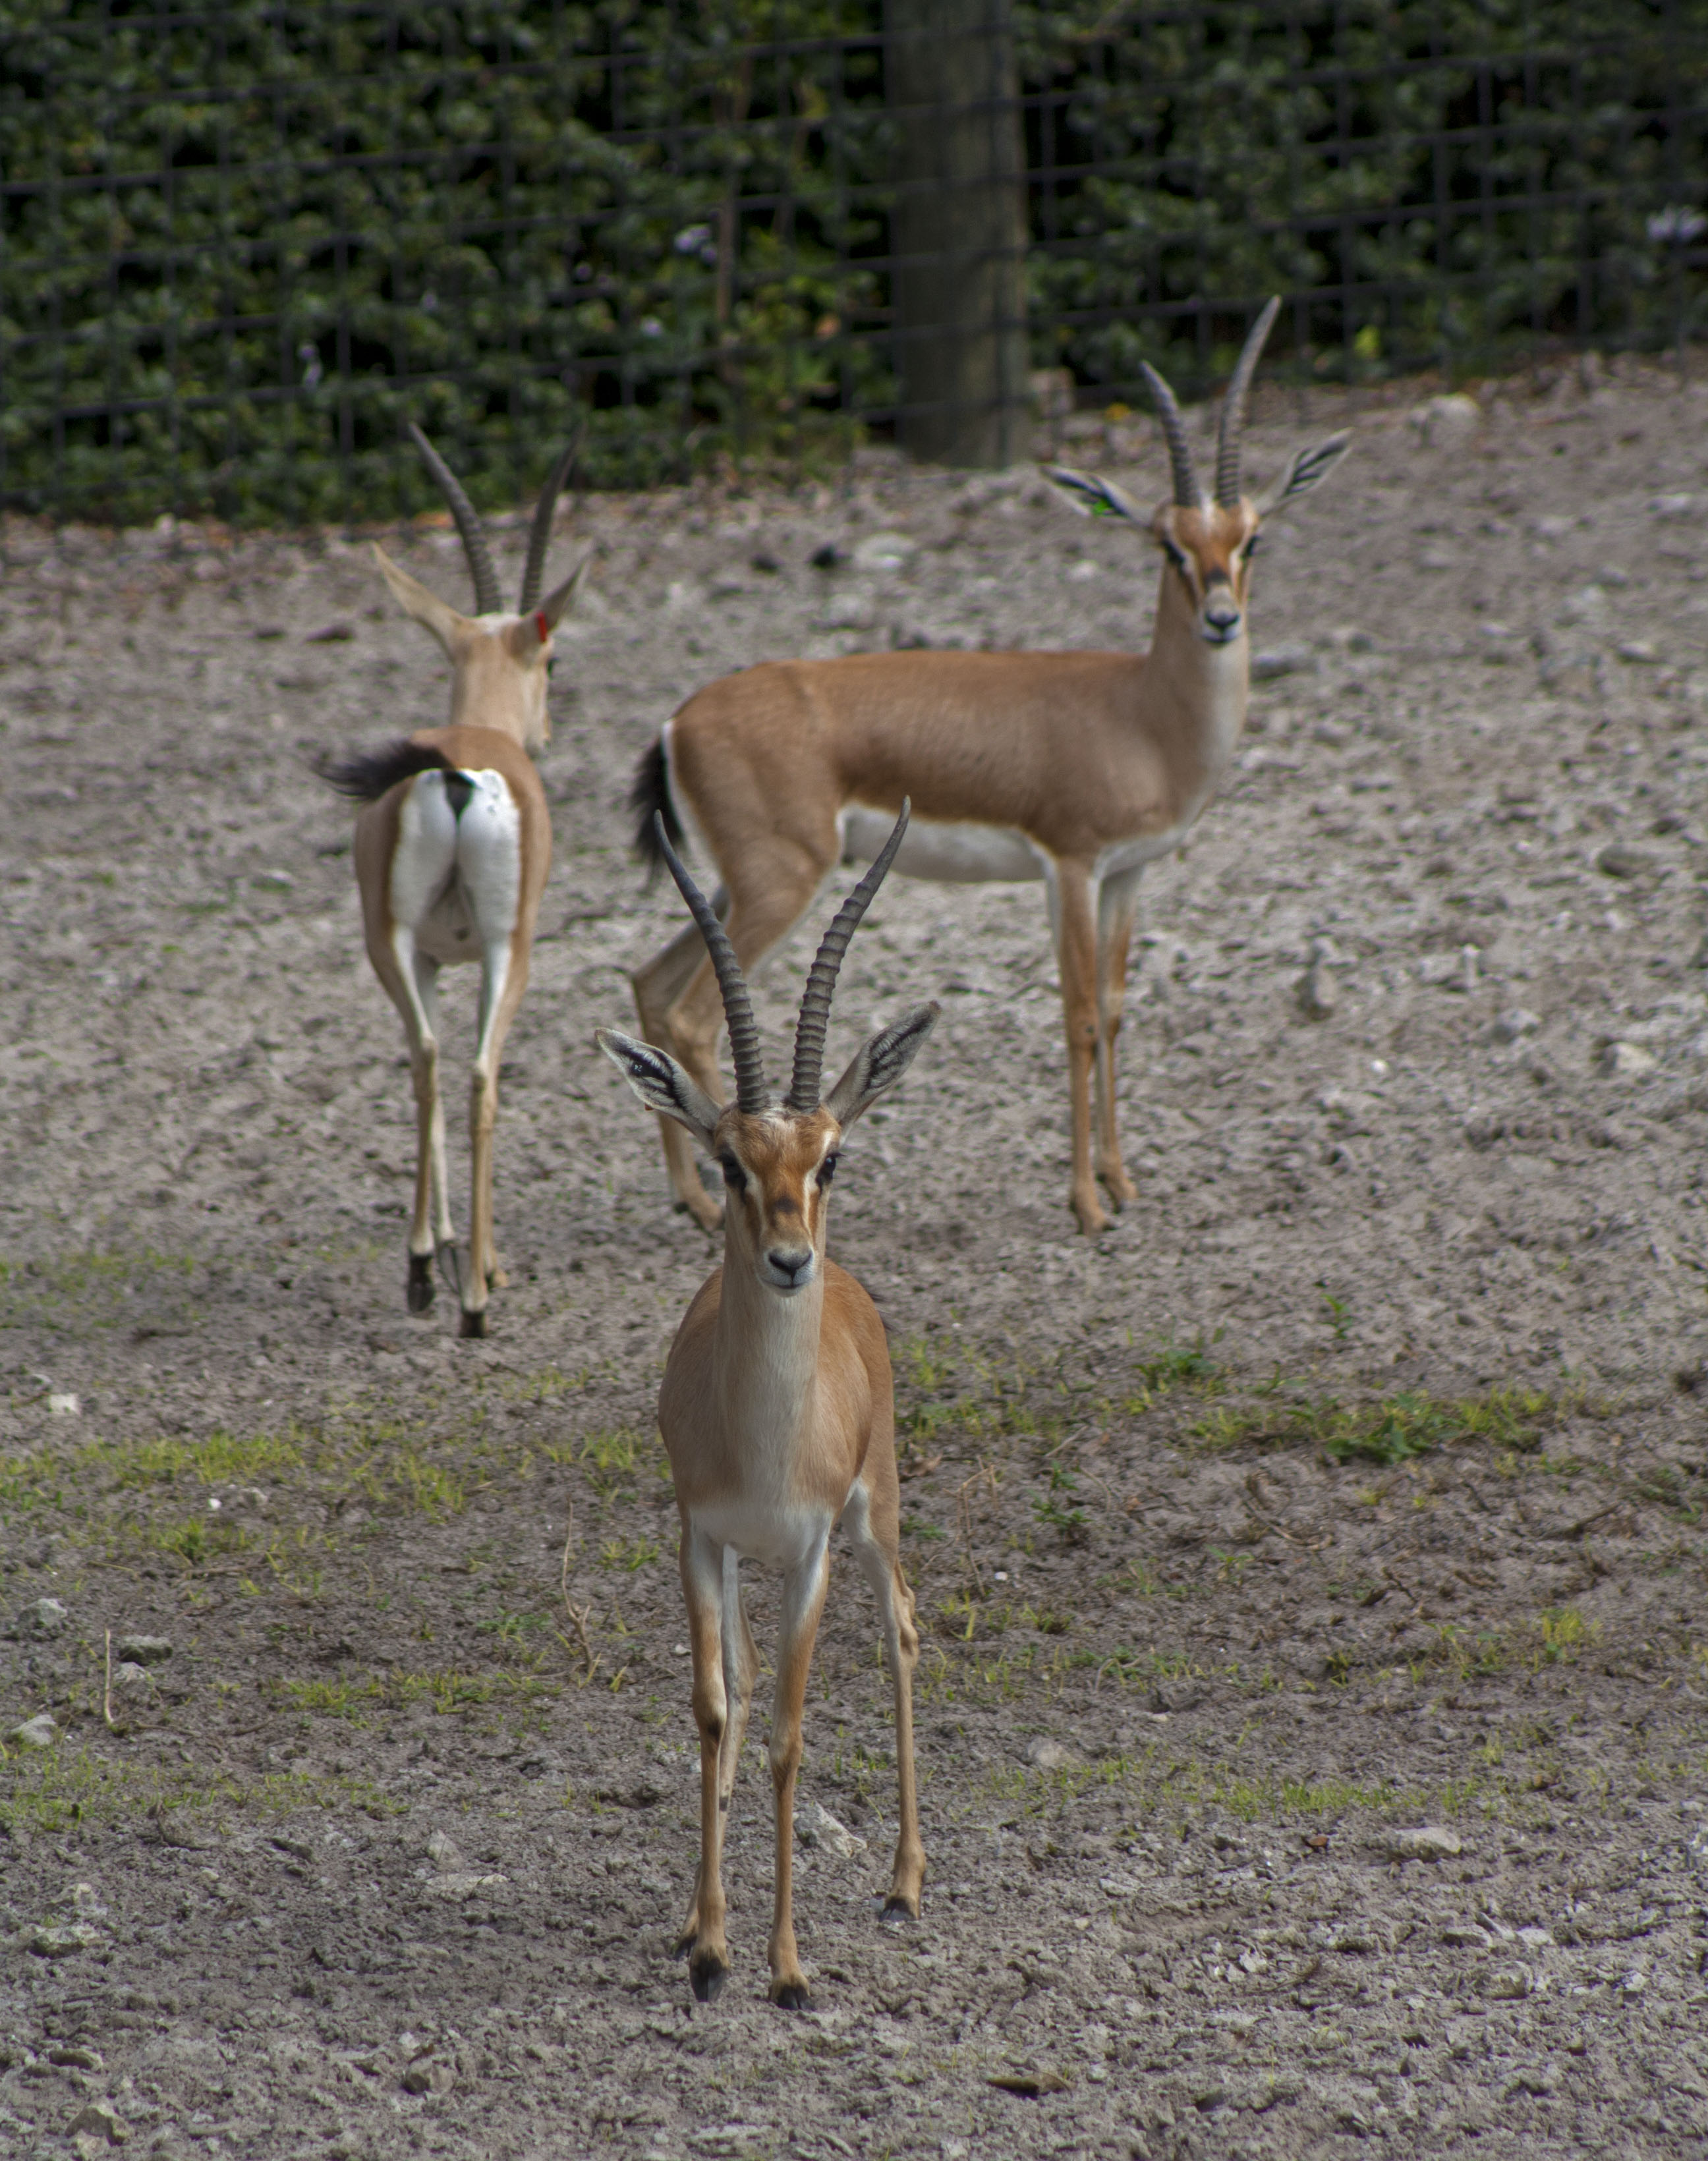 As part of a Species Survival Plan®, a trio of endangered slender-horned gazelles can now be seen at Naples Zoo.